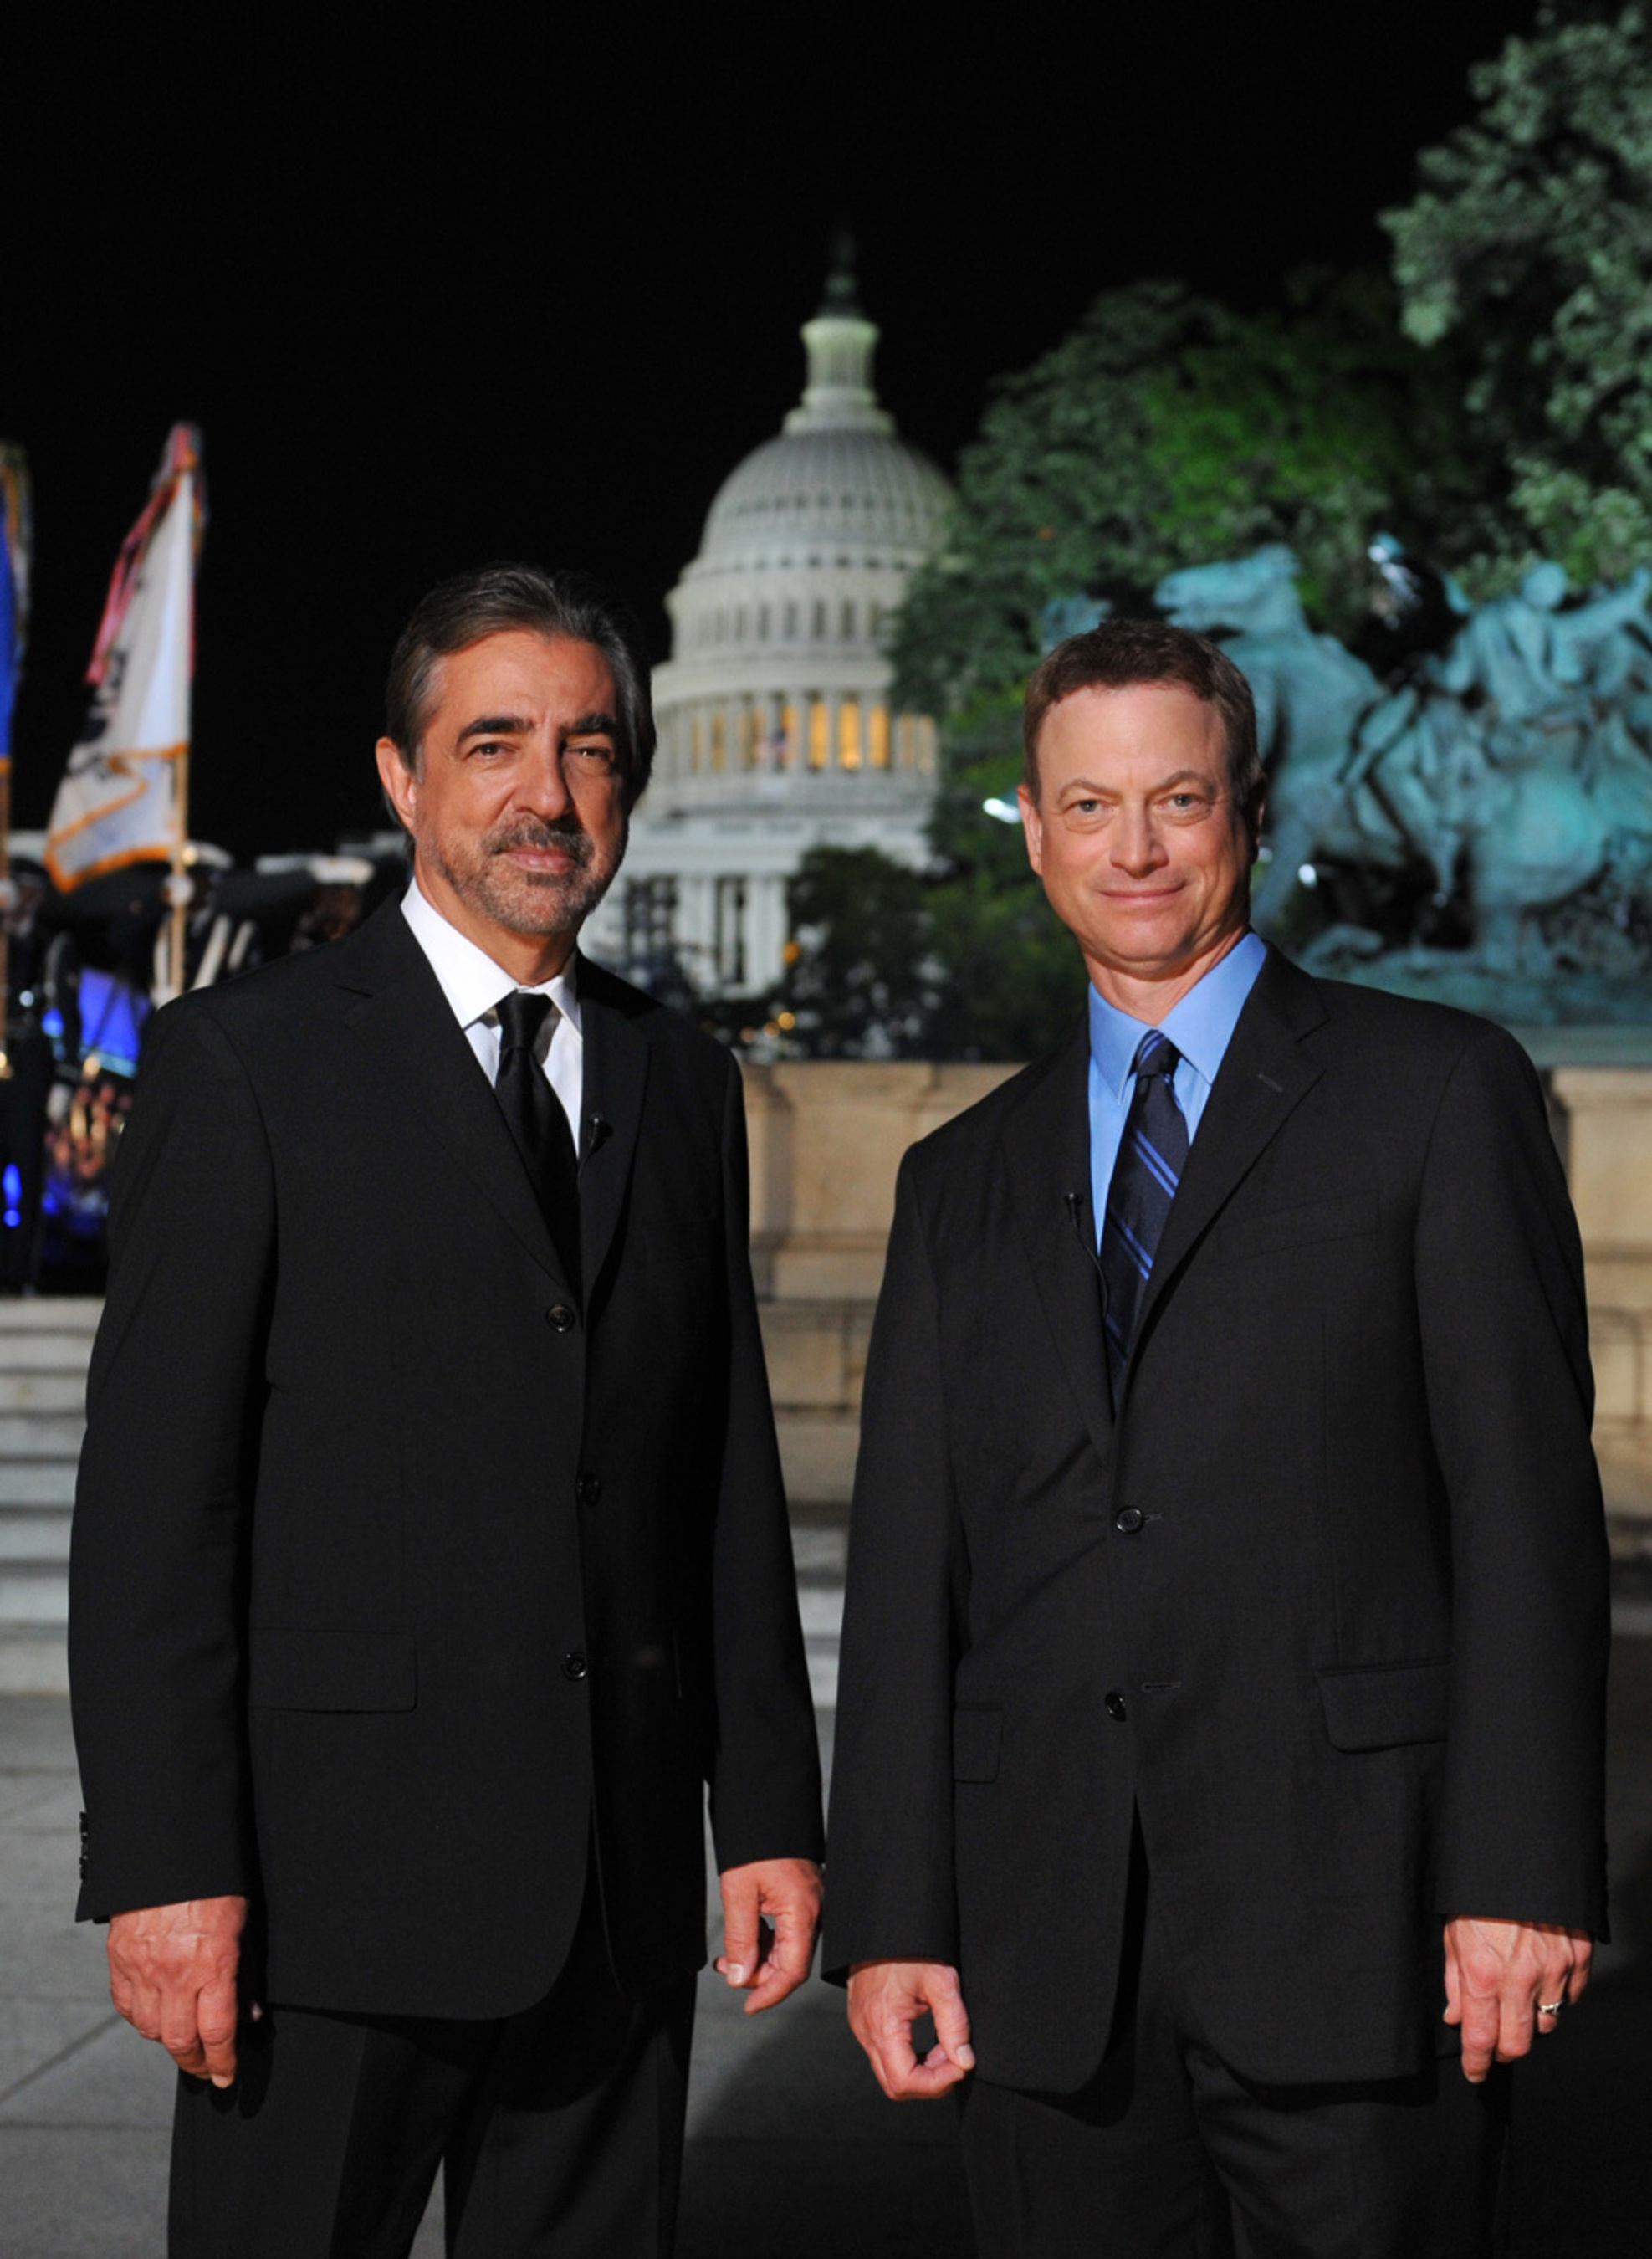 Actors Joe Mantegna and Gary Sinise co-host the 2014 NATIONAL MEMORIAL DAY CONCERT, the 25th anniversary of the live broadcast from the West Lawn of the U.S. Capitol.  The program airs on Sunday, May 25, 2014, from 8:00 to 9:30 p.m. (PRNewsFoto/Capital Concerts)